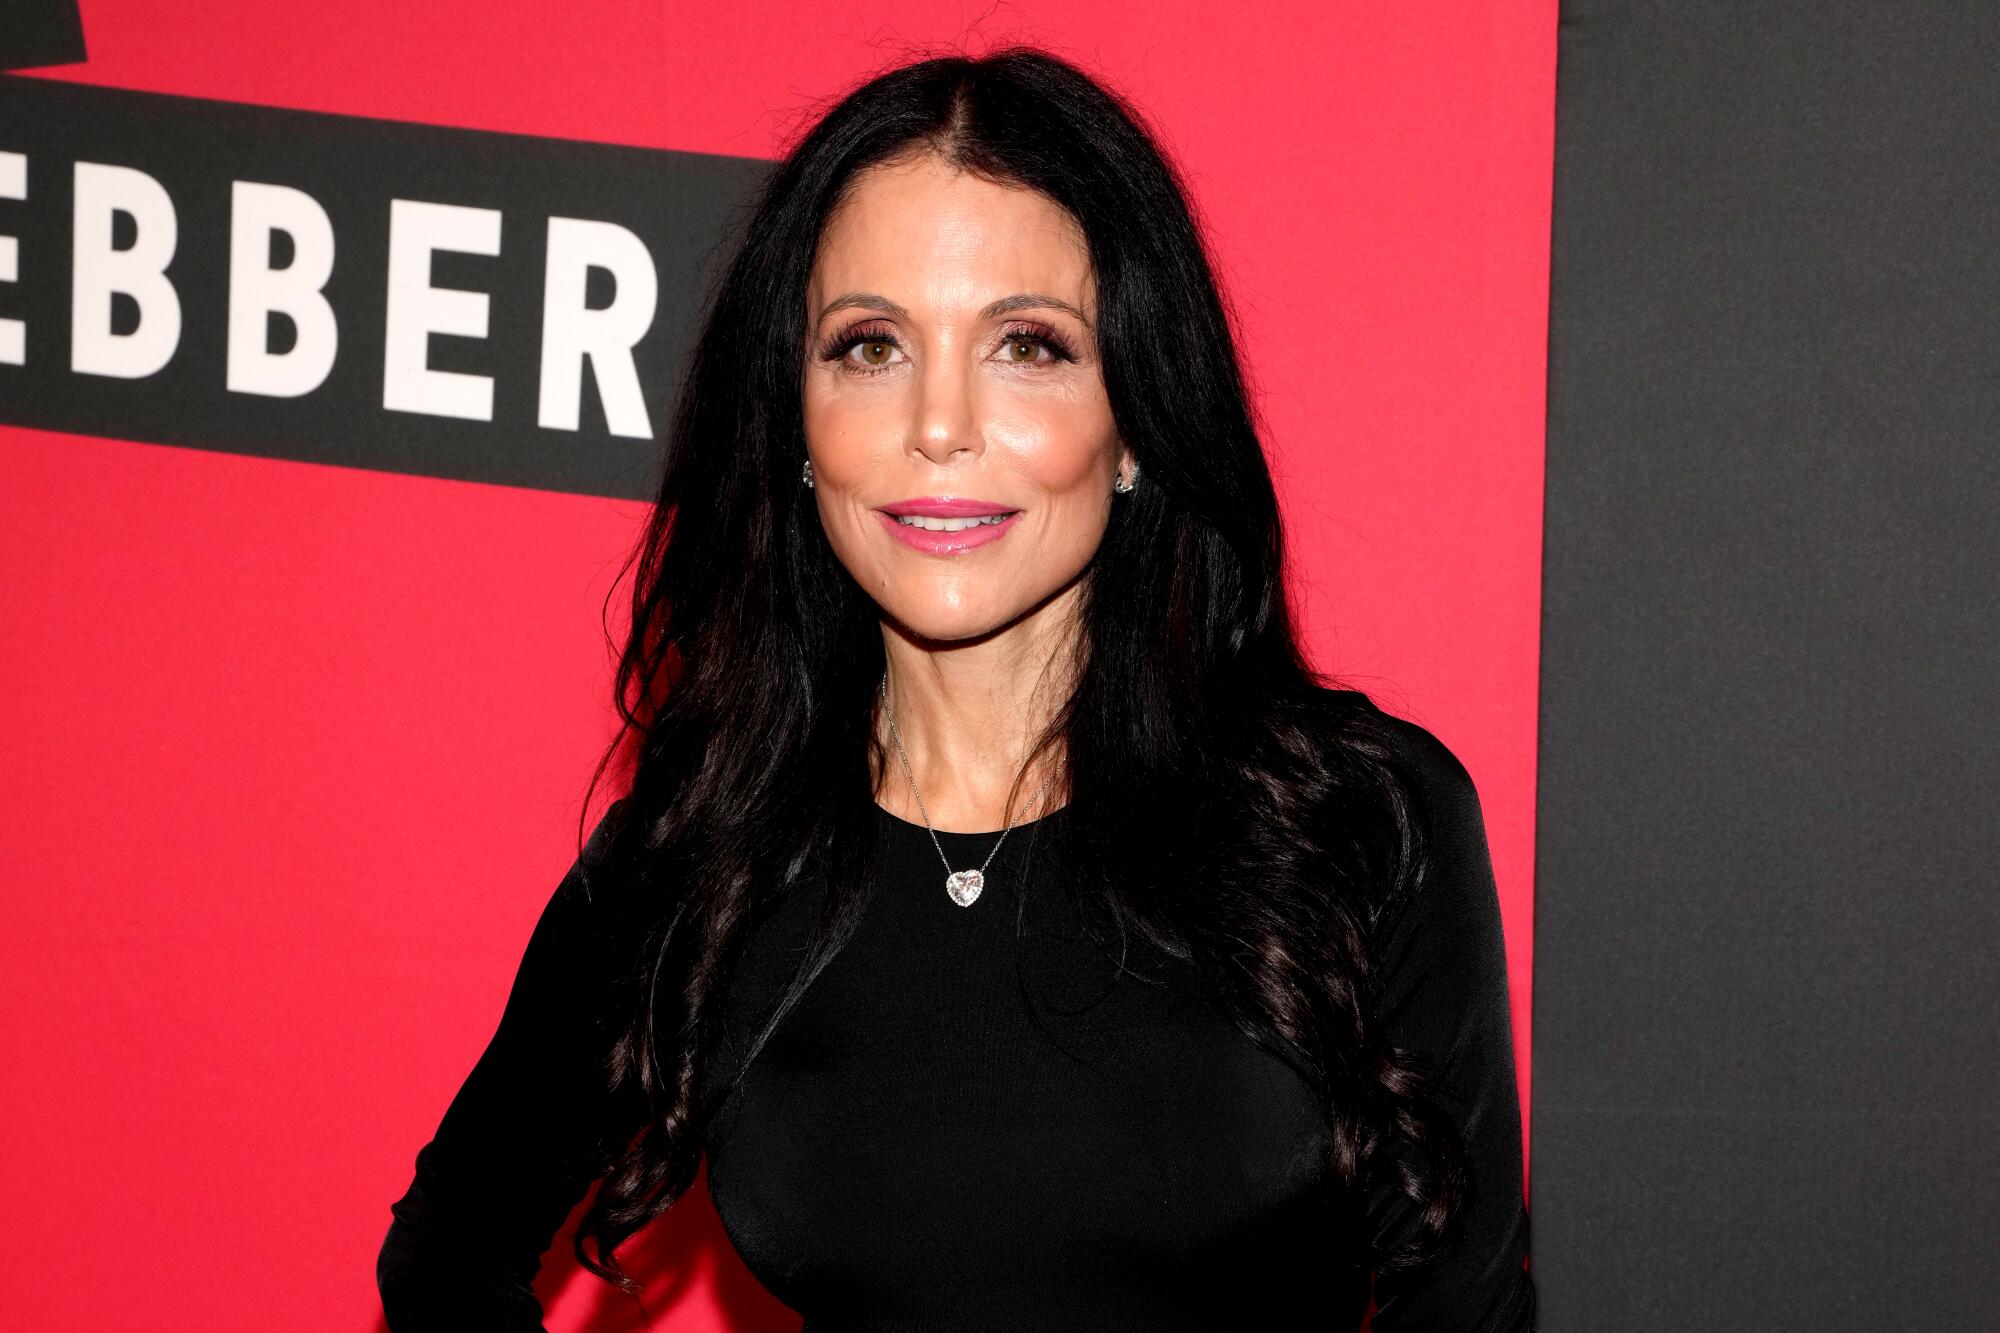 Bethenny Frankel in a black top and silver necklace stands against a red backdrop. 